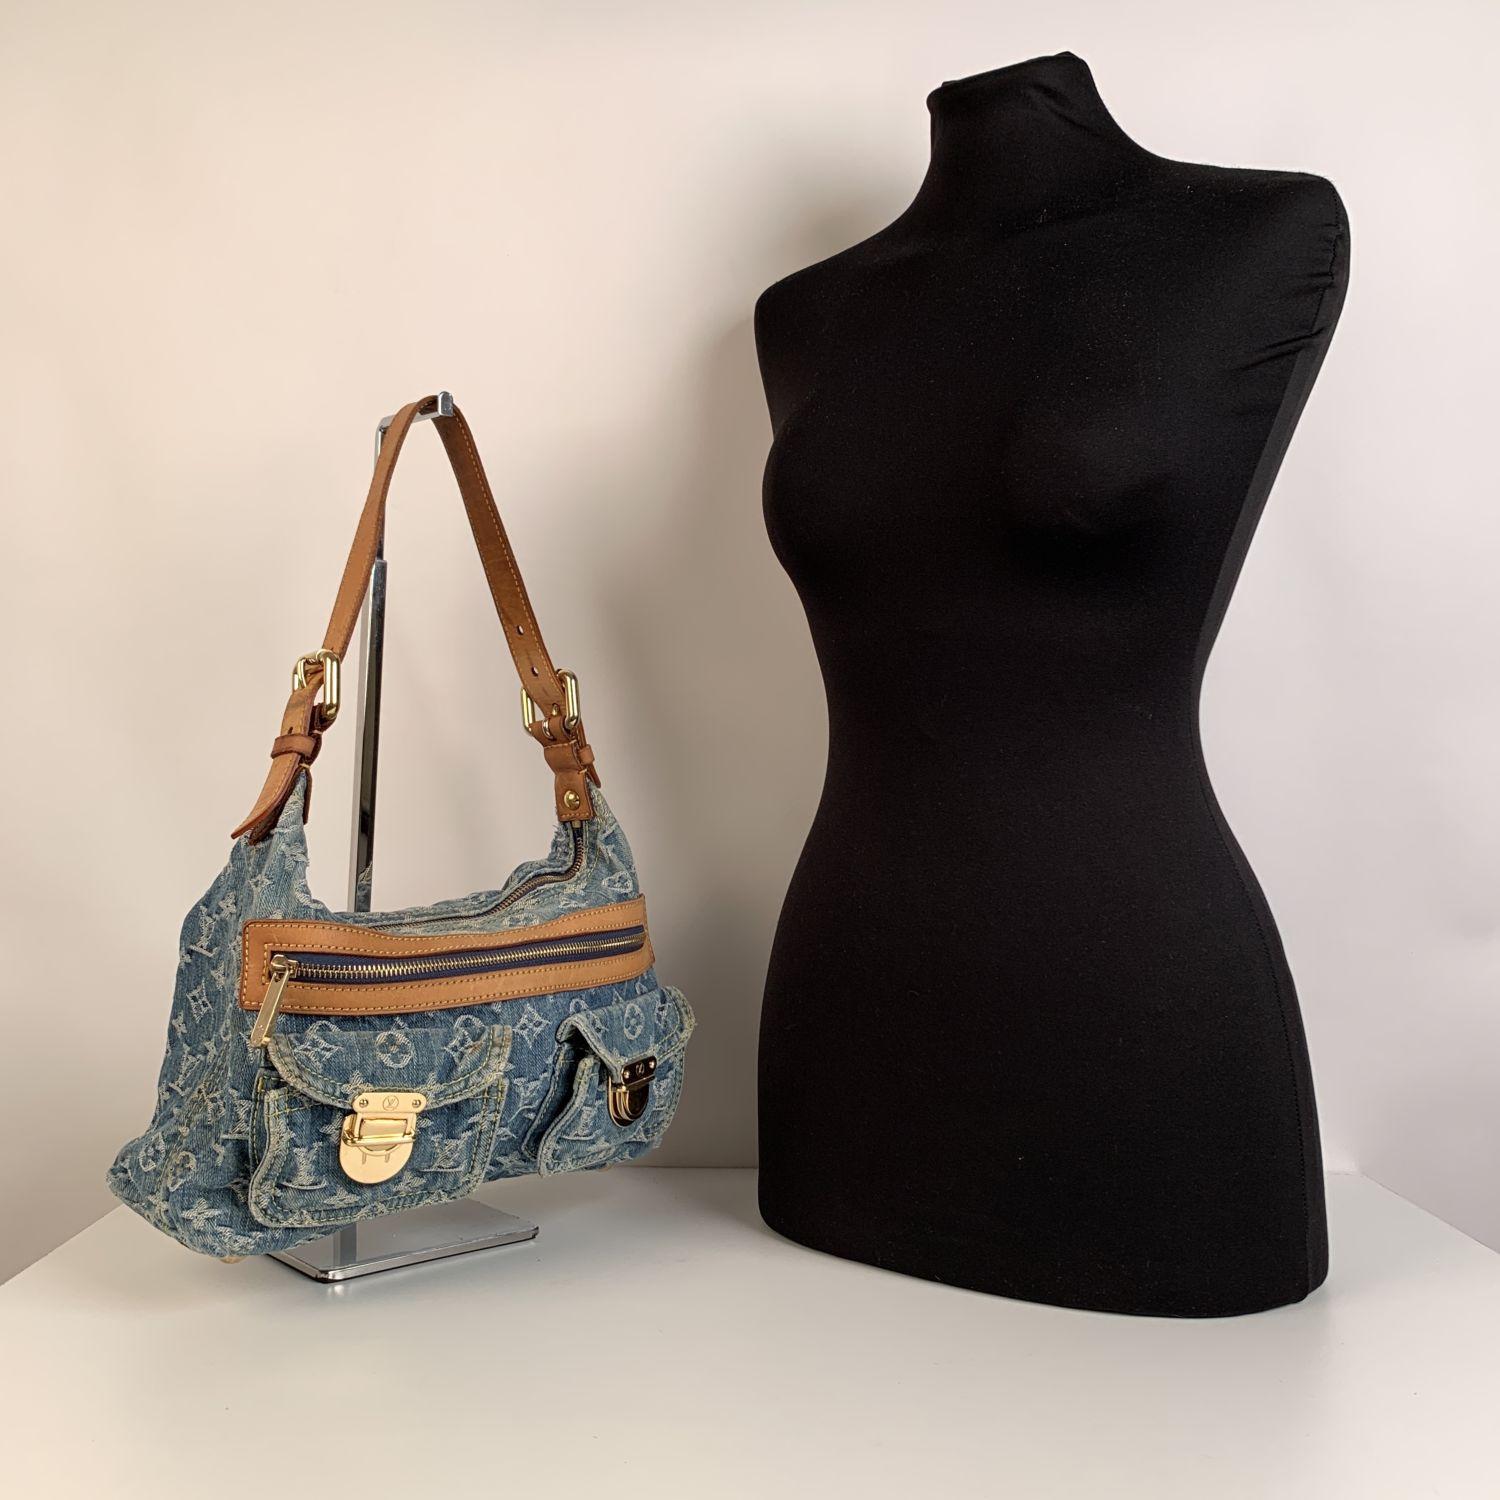 Casual Louis Vuitton Monogram Denim 'Baggy Pm' Shoulder bag. The bag is crafted in light blue monogram denim with tan leather trim and shoulder strap. Gold metal hardware. 2 gusseted pockets with push-lock closures and 1 front zip pocket. Upper